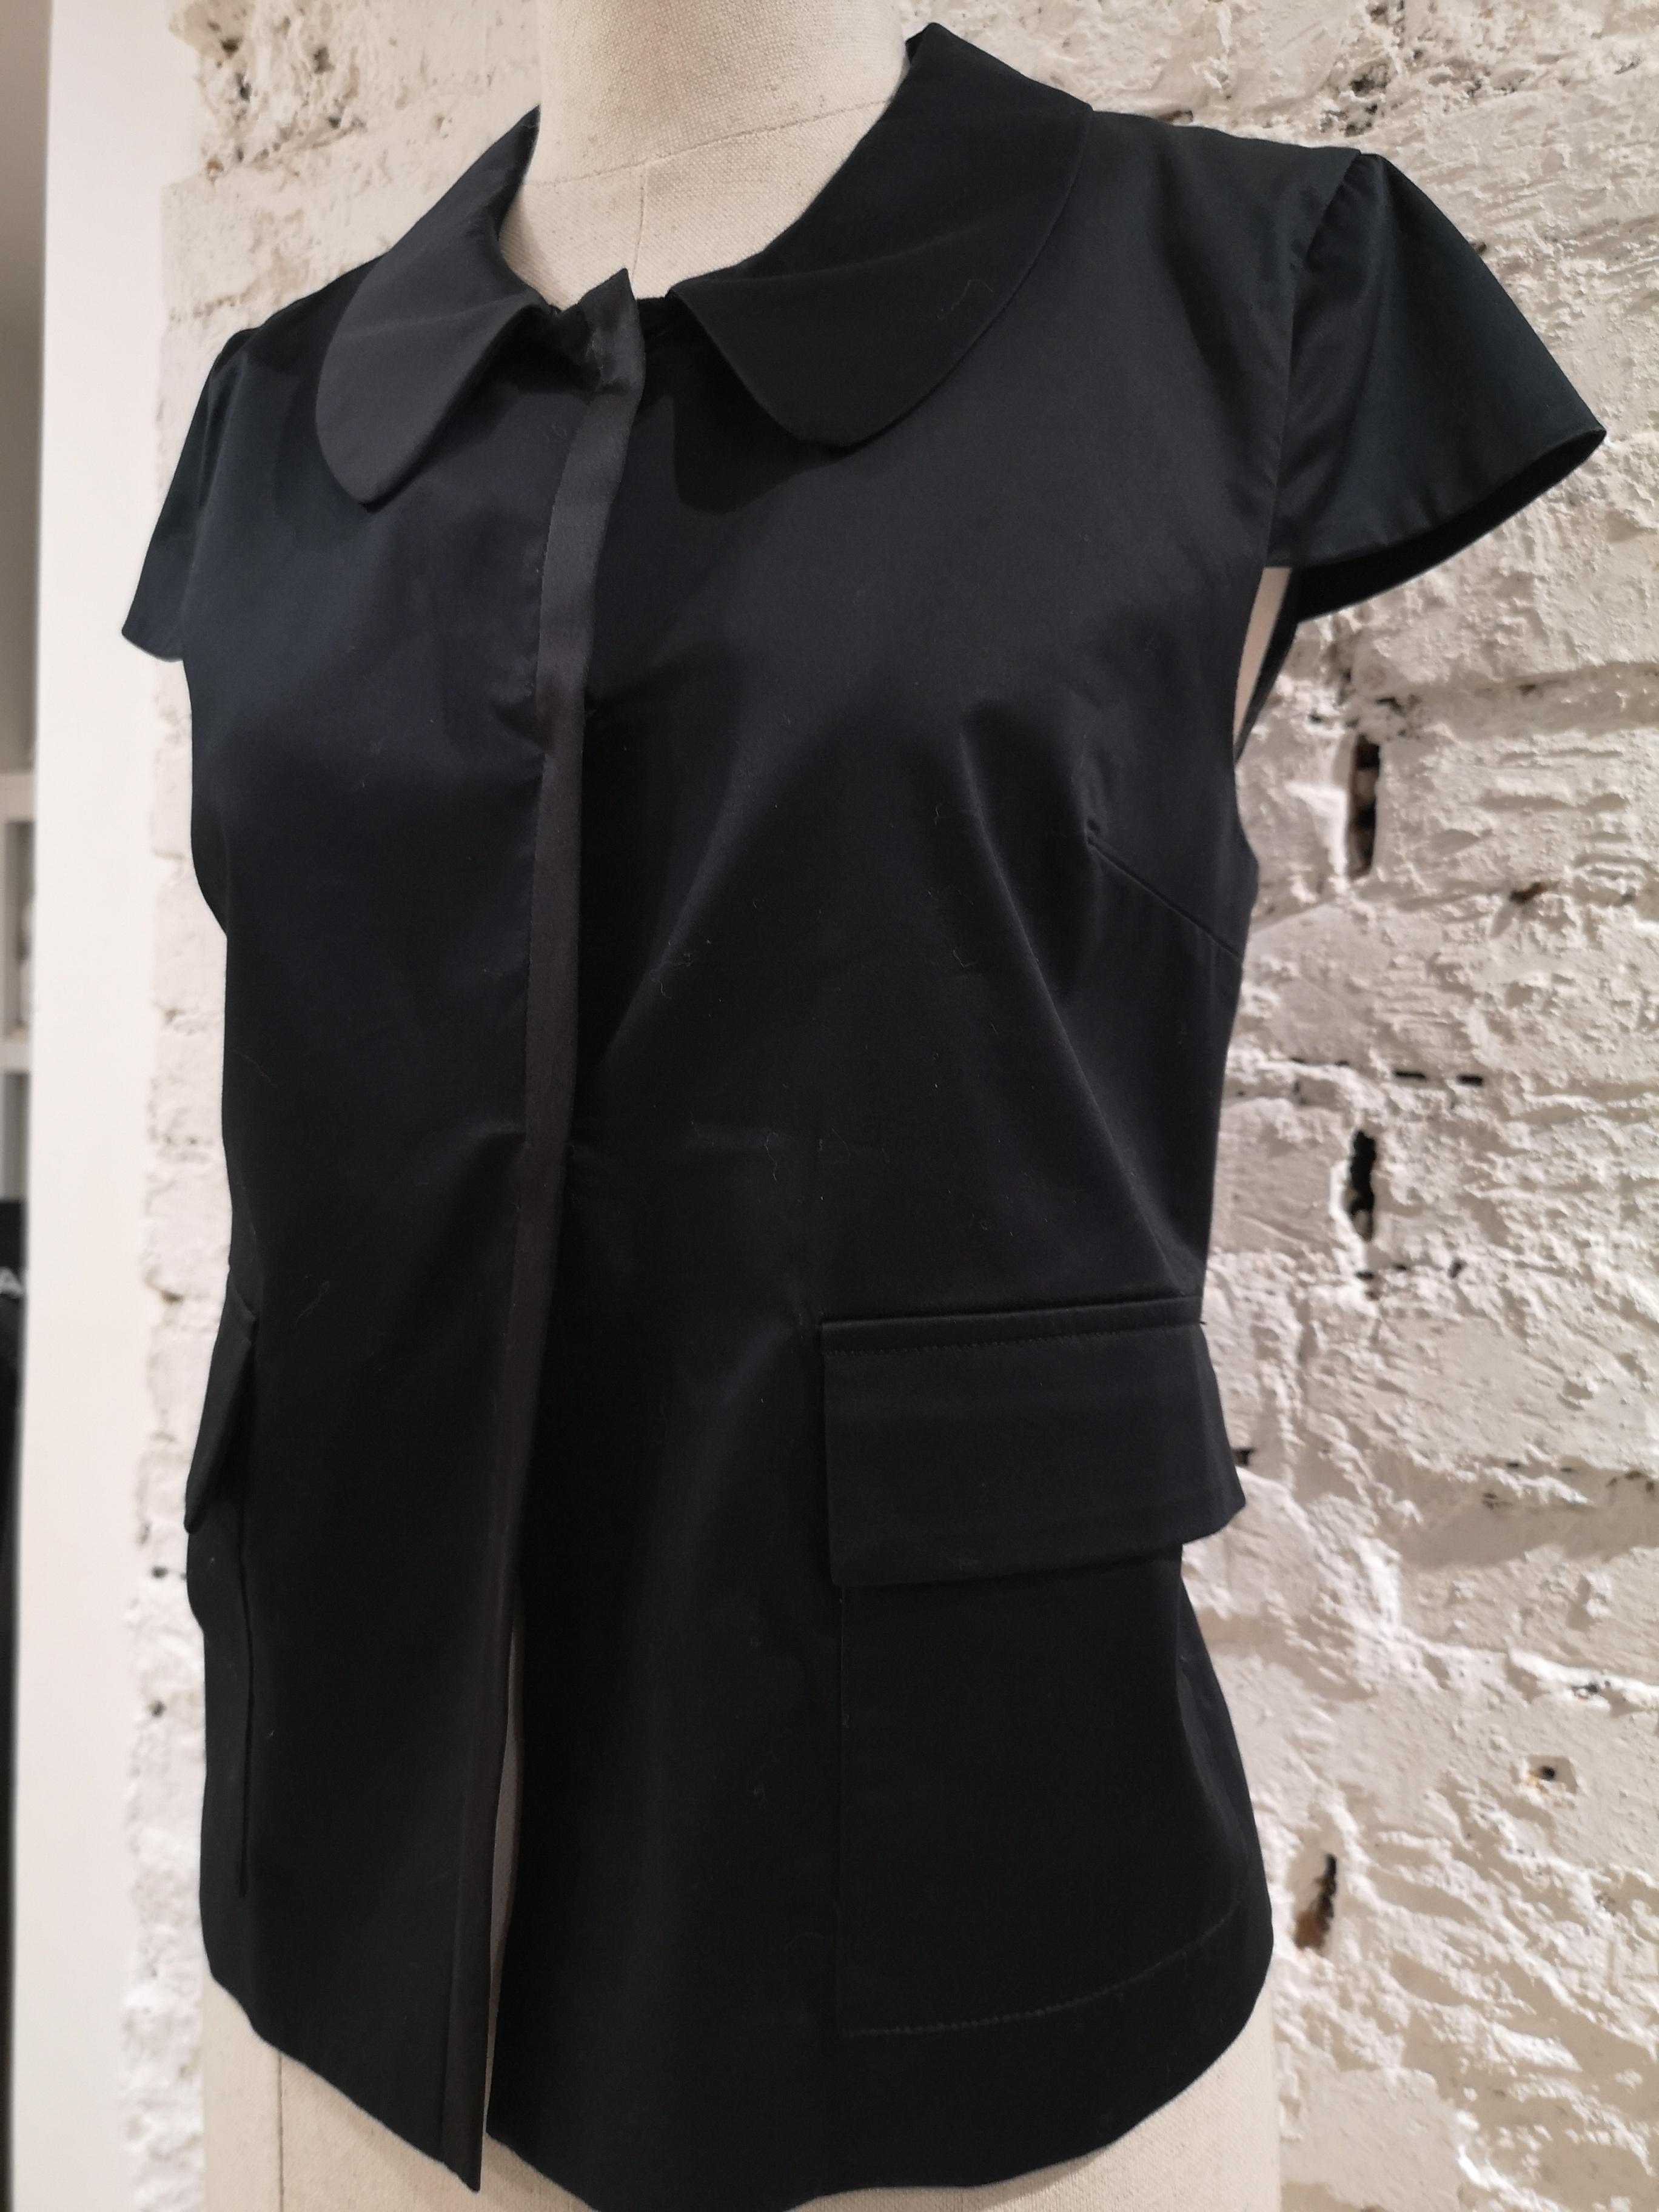 L'Autre Chose black shirt - sleeveless jacket
totally made of cotton in size 44